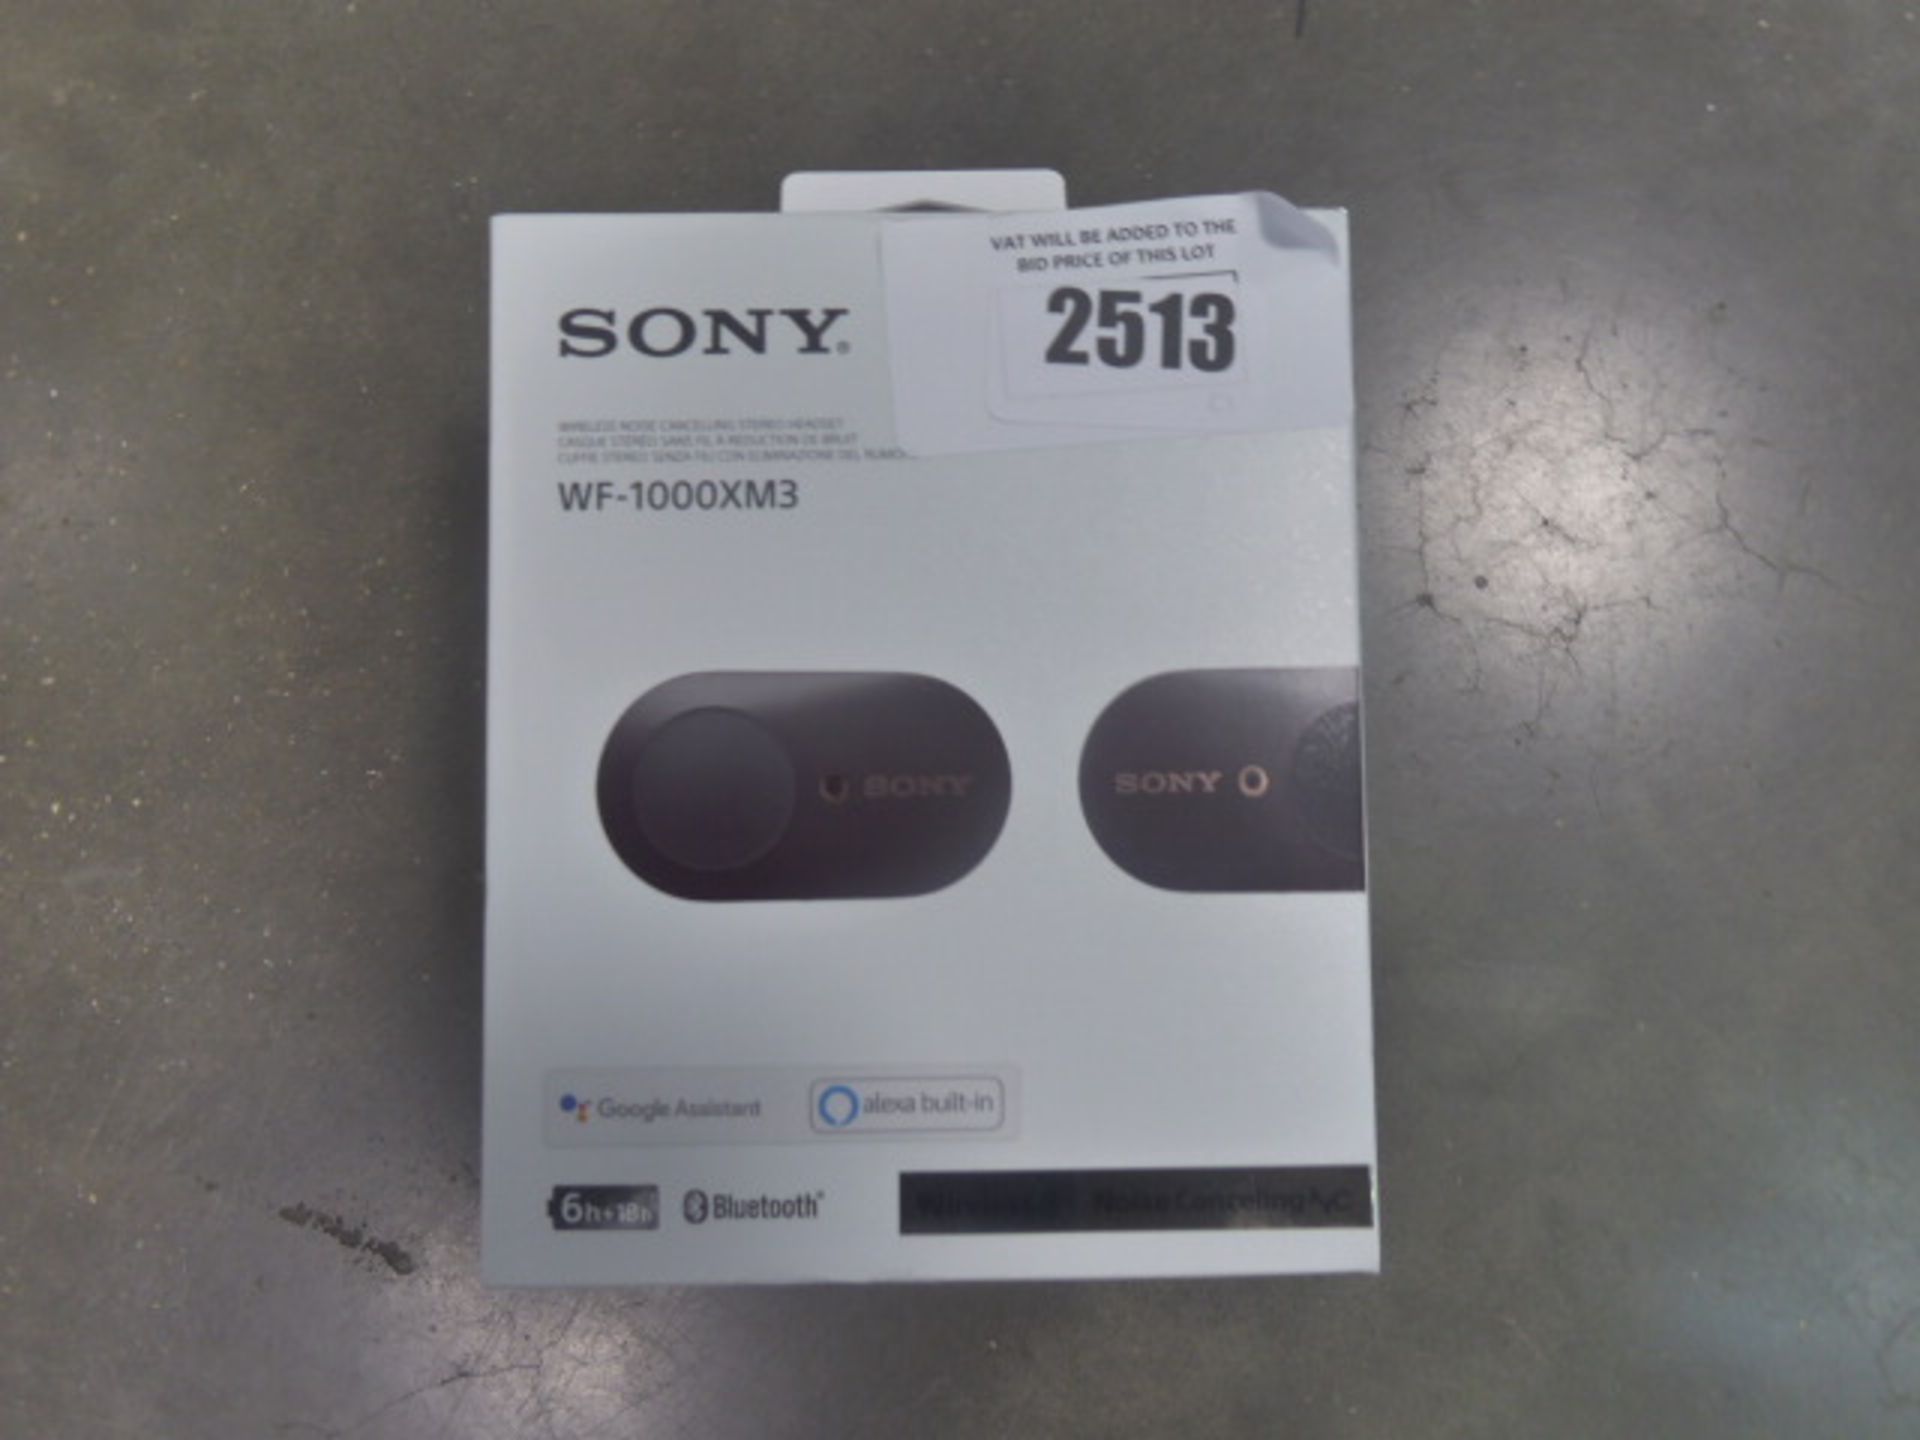 Sony WF-1000XM3 wireless noise cancelling earbuds with charging case and box